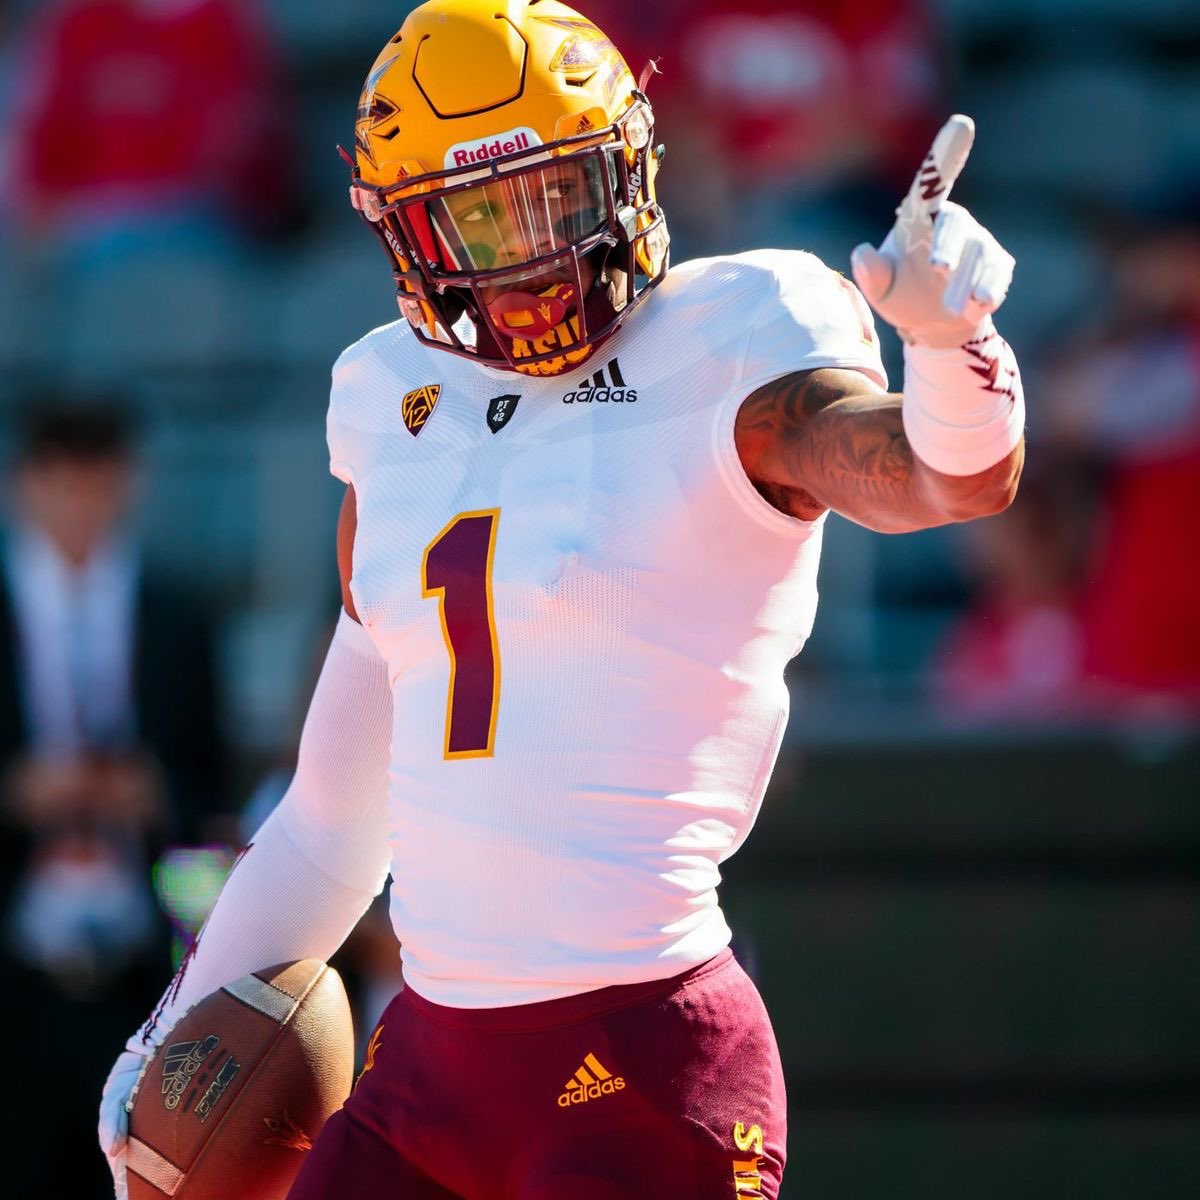 Glory to The Most High! #AGTG After an amazing conversation with @CoachBC_ and @KennyDillingham I’m beyond blessed to receive an offer from Arizona State University! @Zinn68 @BBell__ @EMitch_28 @Bullard_Coach @Jalil_Johnson21 @jacorynichols @justinallen_13 @Coach_Peterson